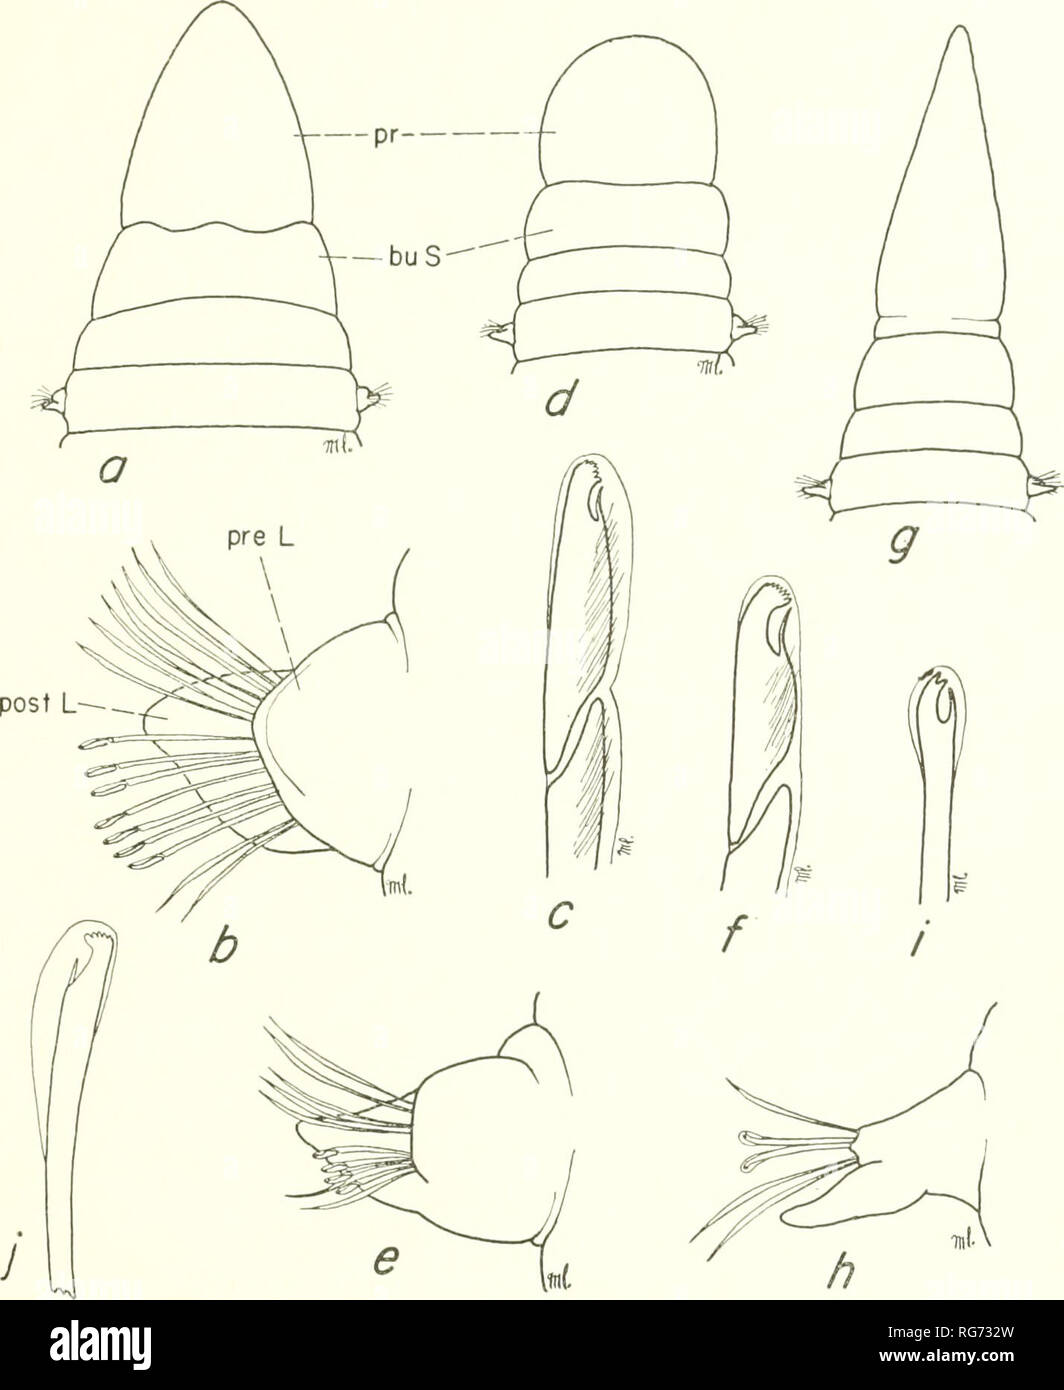 . Bulletin - United States National Museum. Science. POLYCHAETE WORMS, PART 1 259. Figure 67.—Lumbrineridae, a-c, Lumbrineris laireilli: a, dorsal view anterior end; b, anterior parapodium, anterior view; c, compound hooded crotchet or hook from anterior parapodium. d-f, Lumbrineris coccinea; d, dorsal view anterior end; e, anterior parapo- dium, anterior view;/, compound hooded crotchet from anterior parapodium. g-i, Lum- brineris acuta: g, dorsal view anterior end (after Verrill, 1875); h, middle parapodium, dorsal view; i, hooded crotchet from same. /, Lumbri^ieris impatiens, simple hooded  Stock Photo